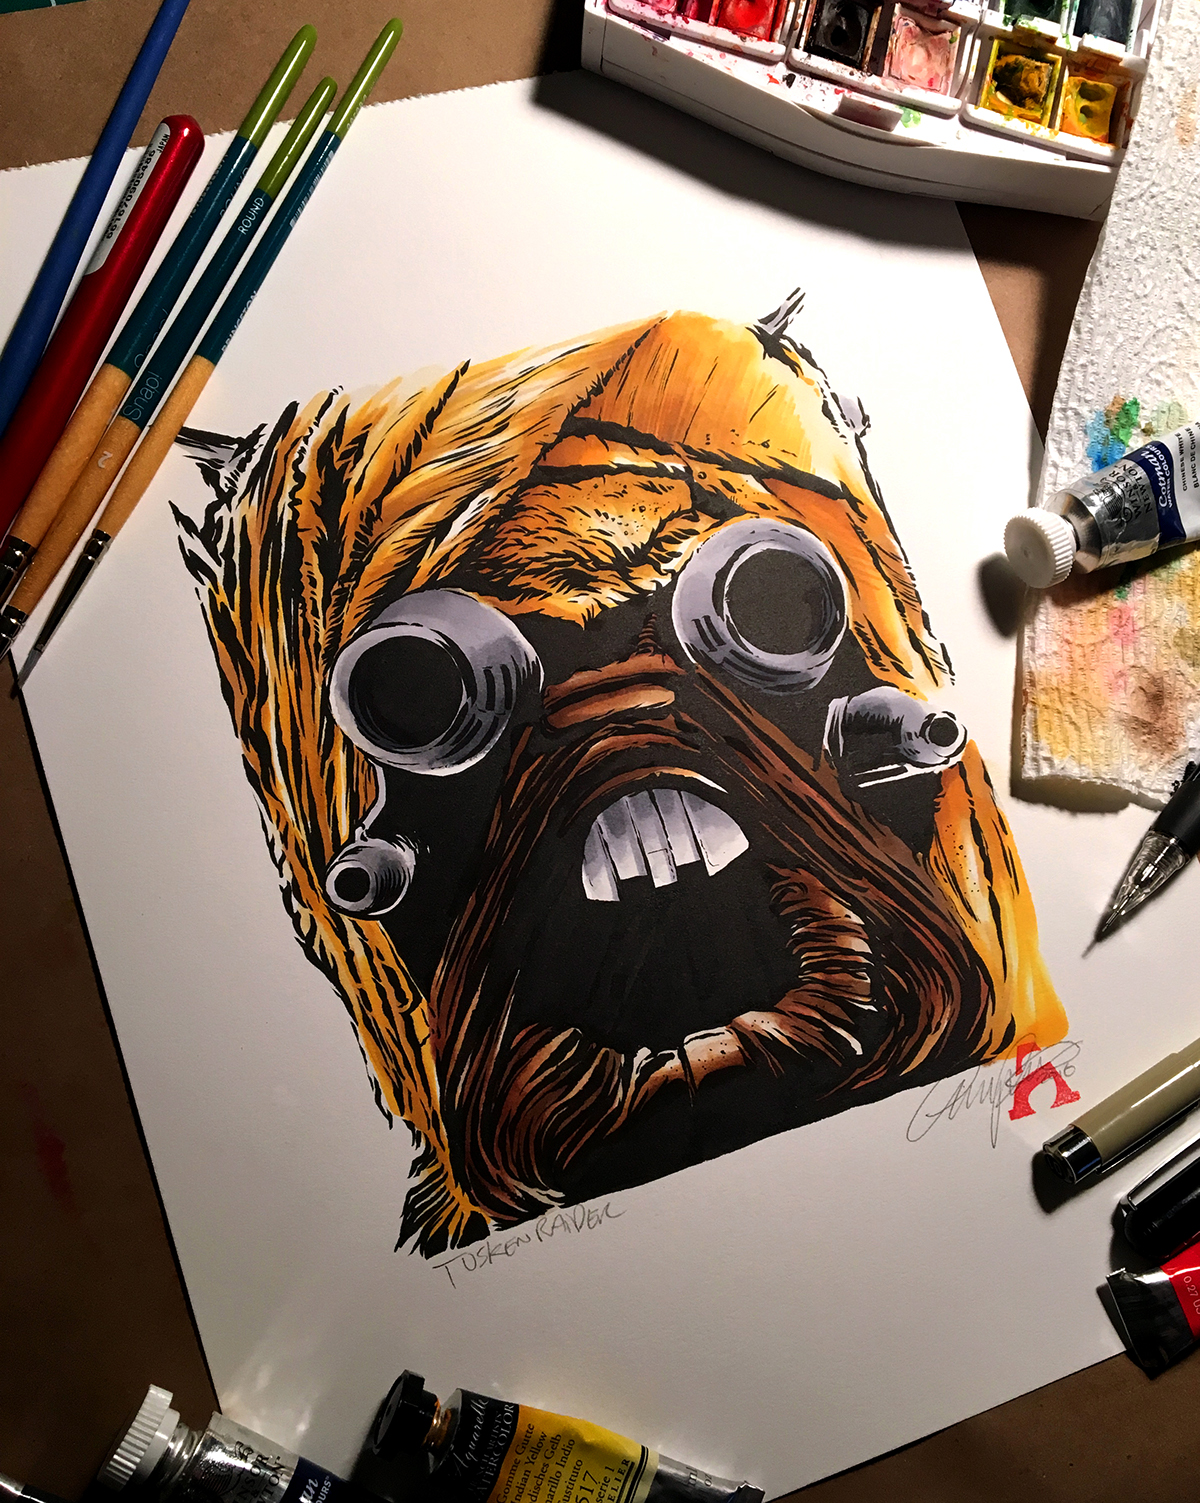 star wars ink prismacolor markers watercolor paint bossk jabba the hut tusken raider rancor